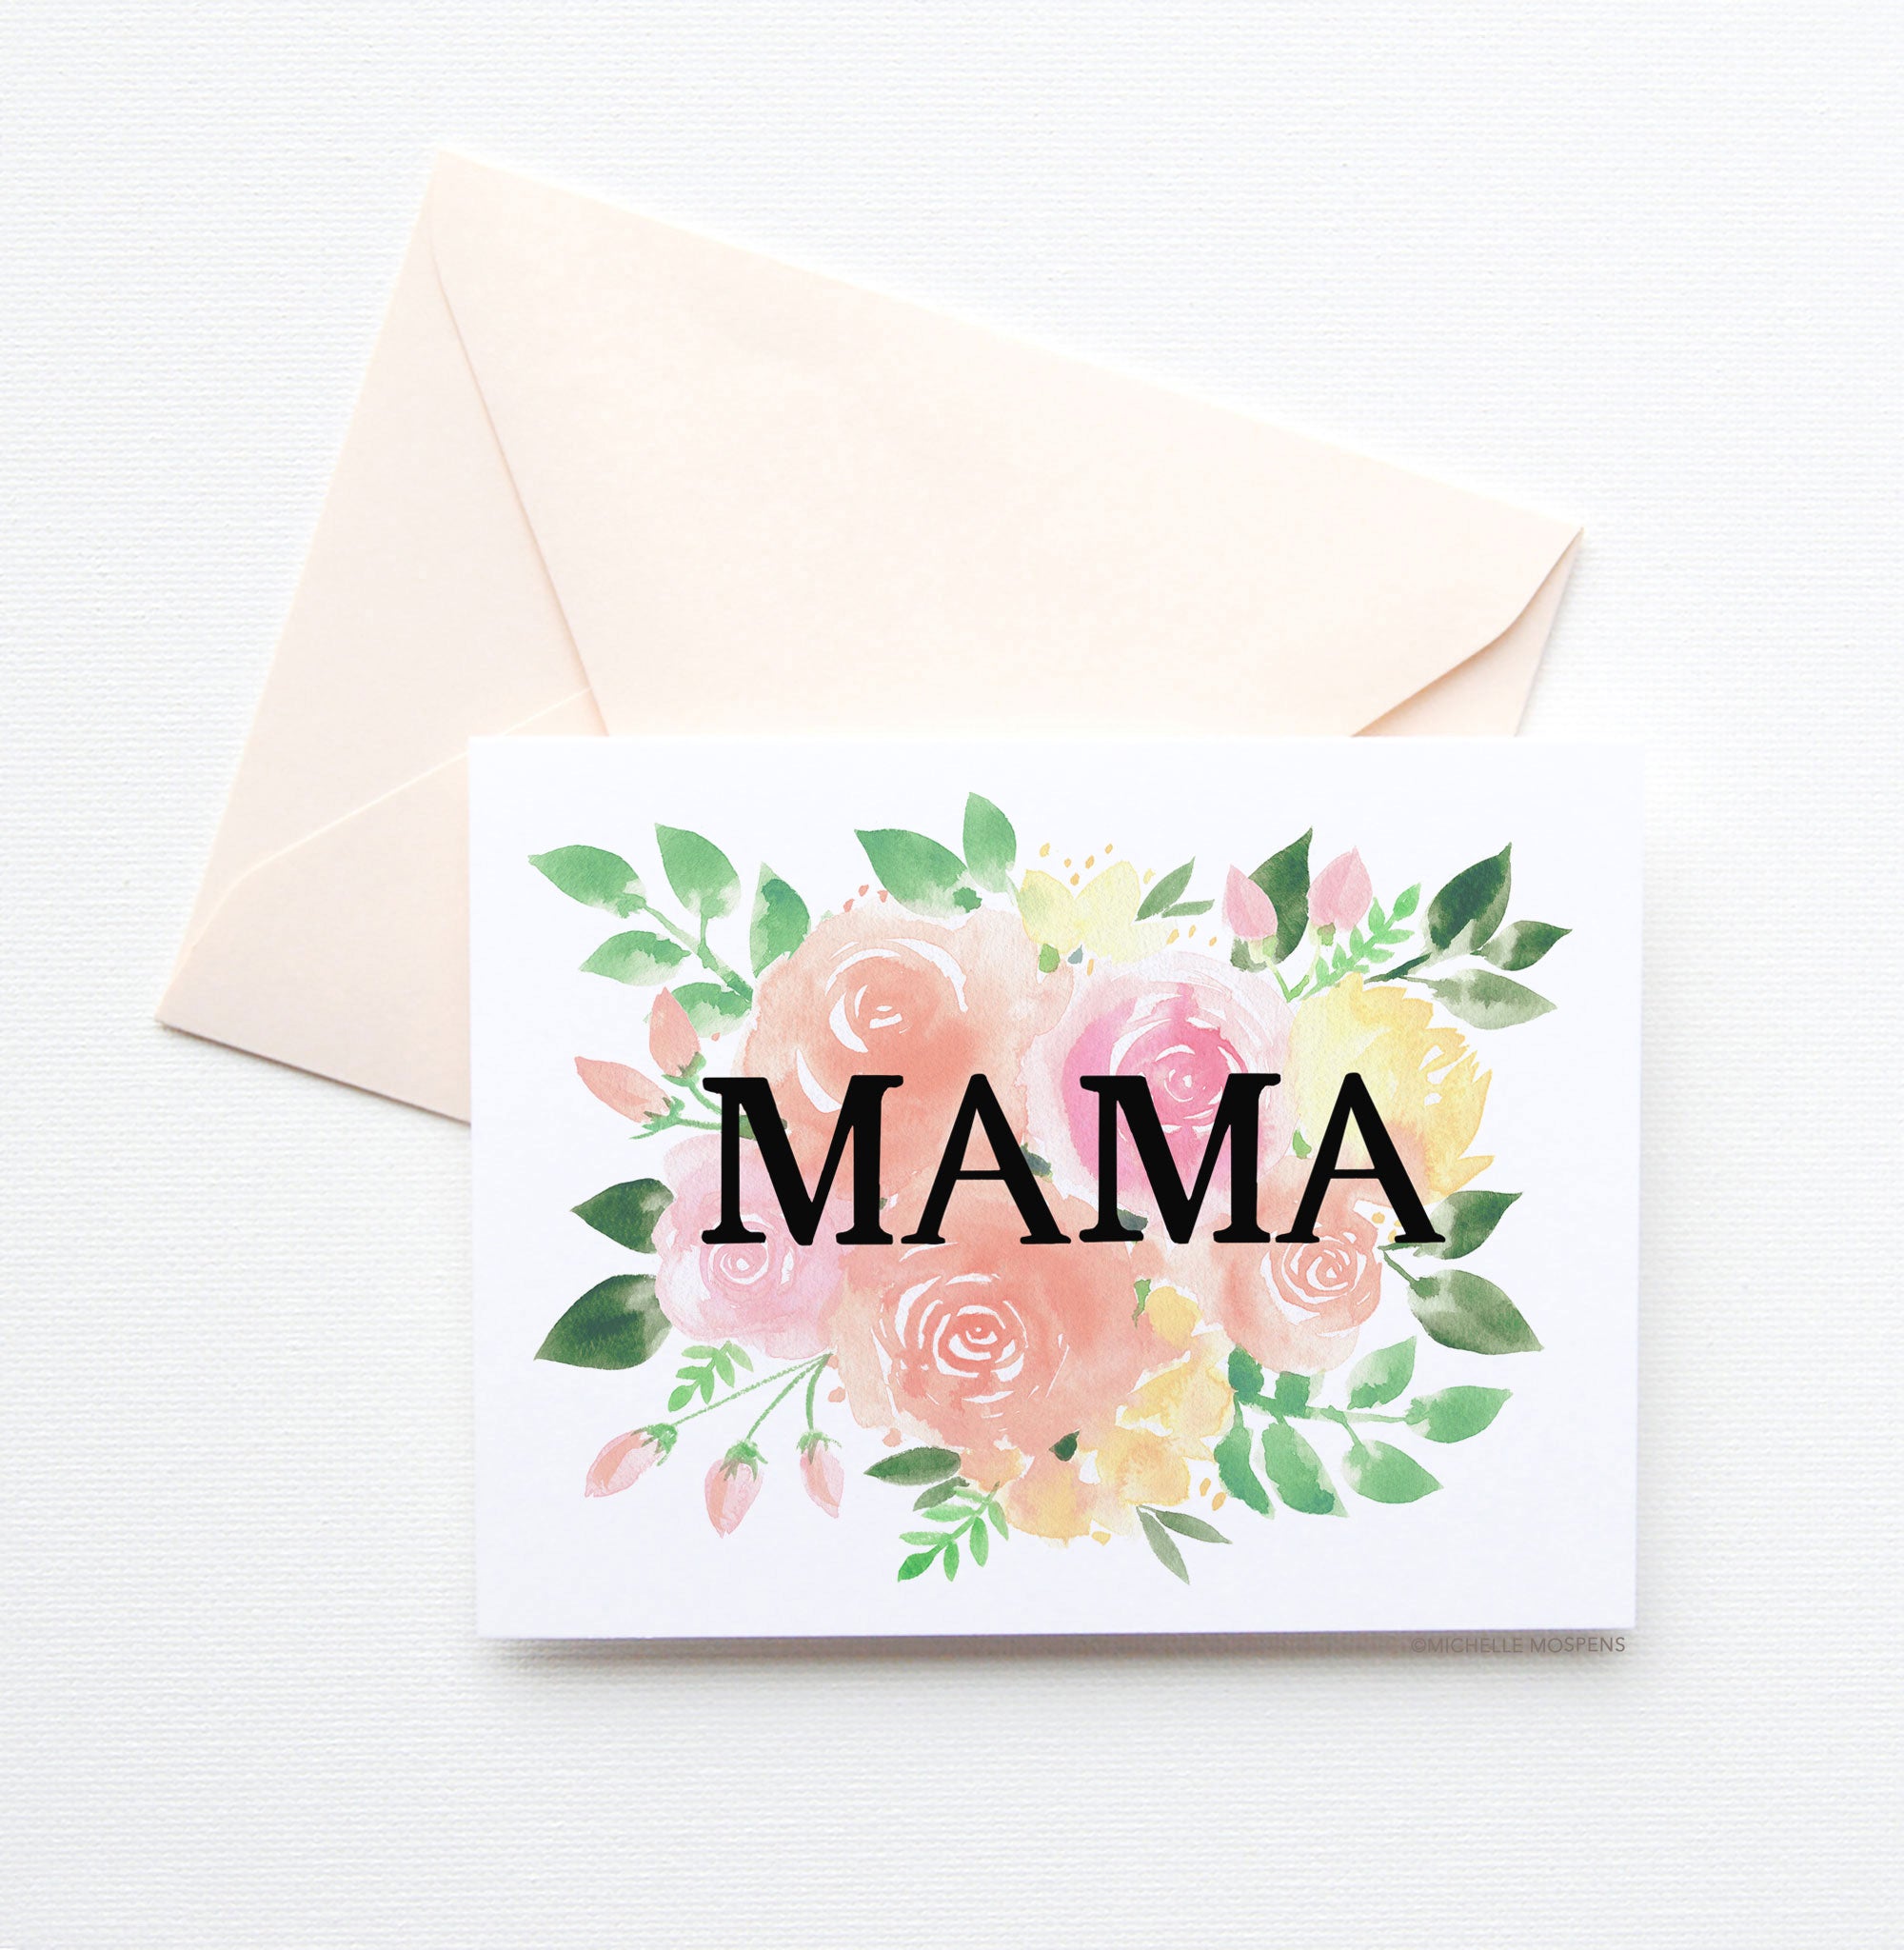 Watercolor MAMA Greeting Card by Michelle Mospens, Cute New Mom and Mother's Day Card